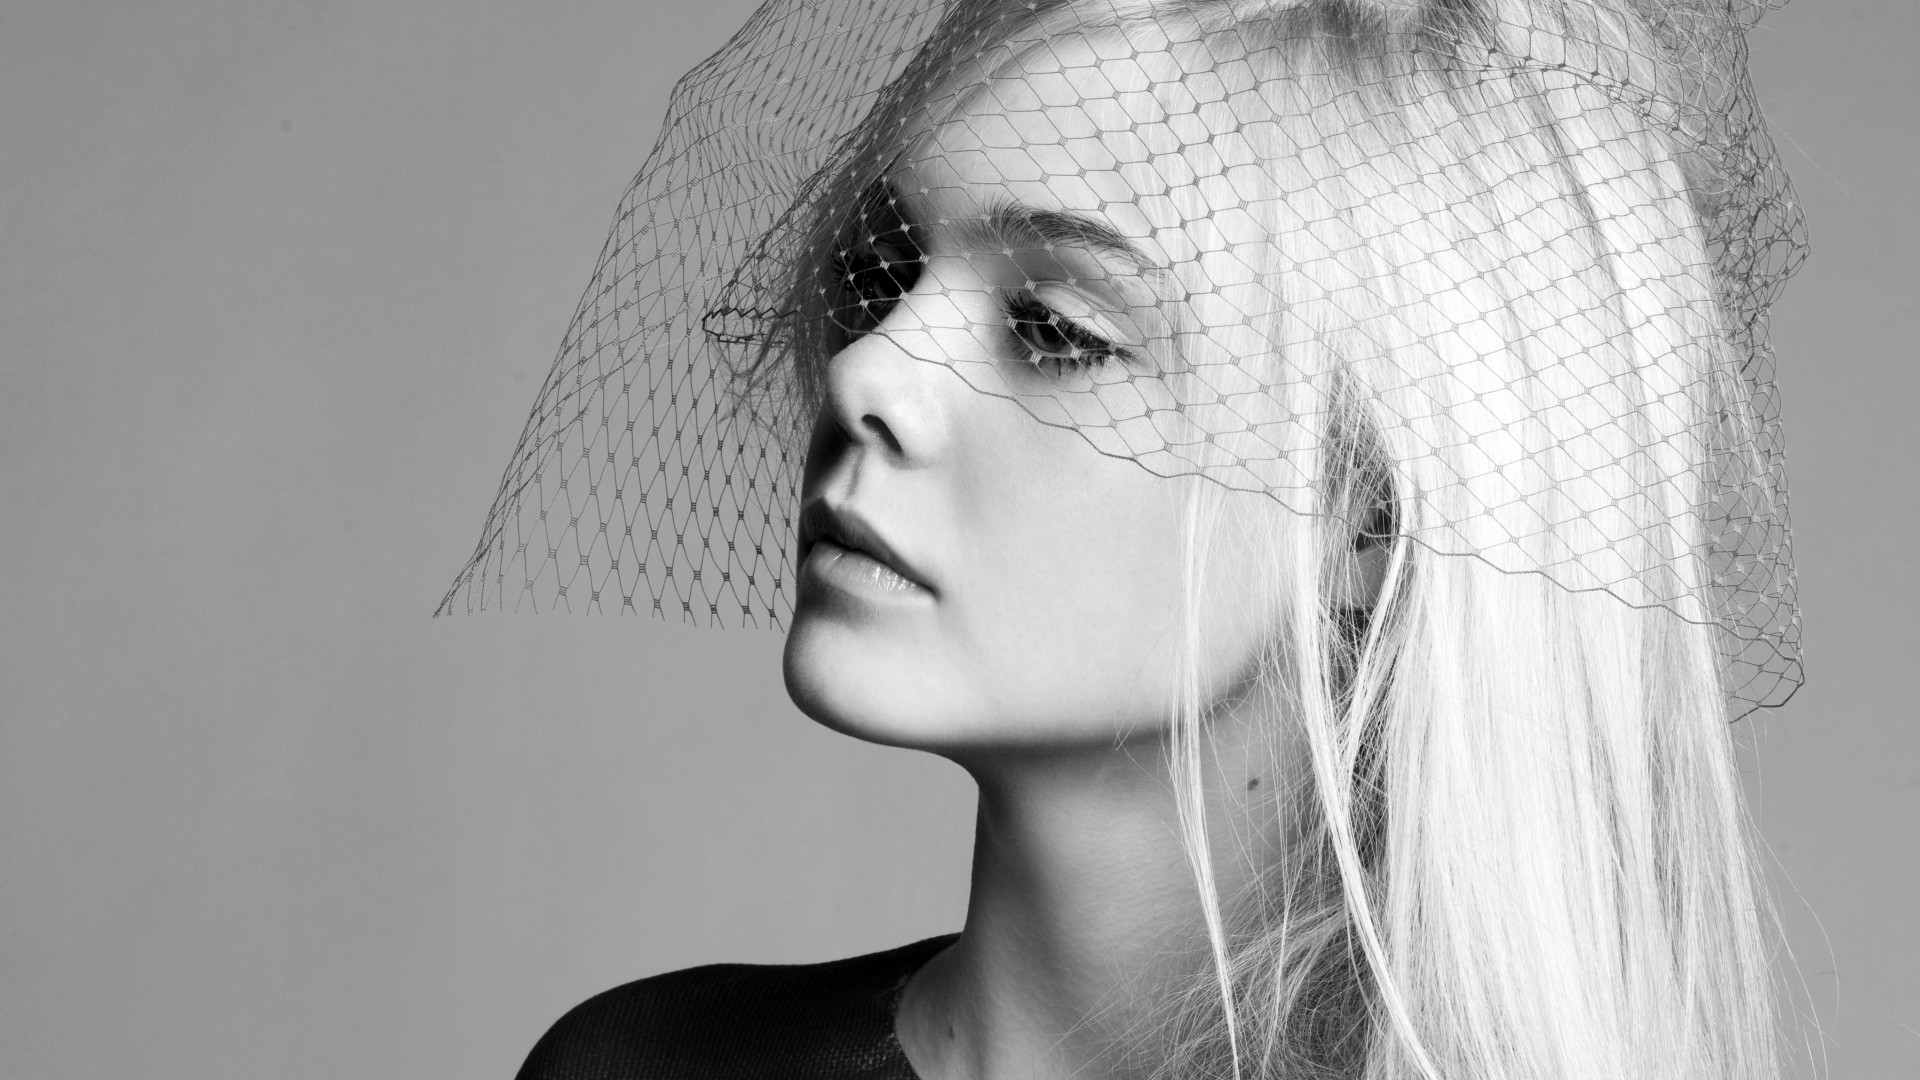 Elle Fanning, Actress, blonde, black and white photo, mysterious, portrait (horizontal)